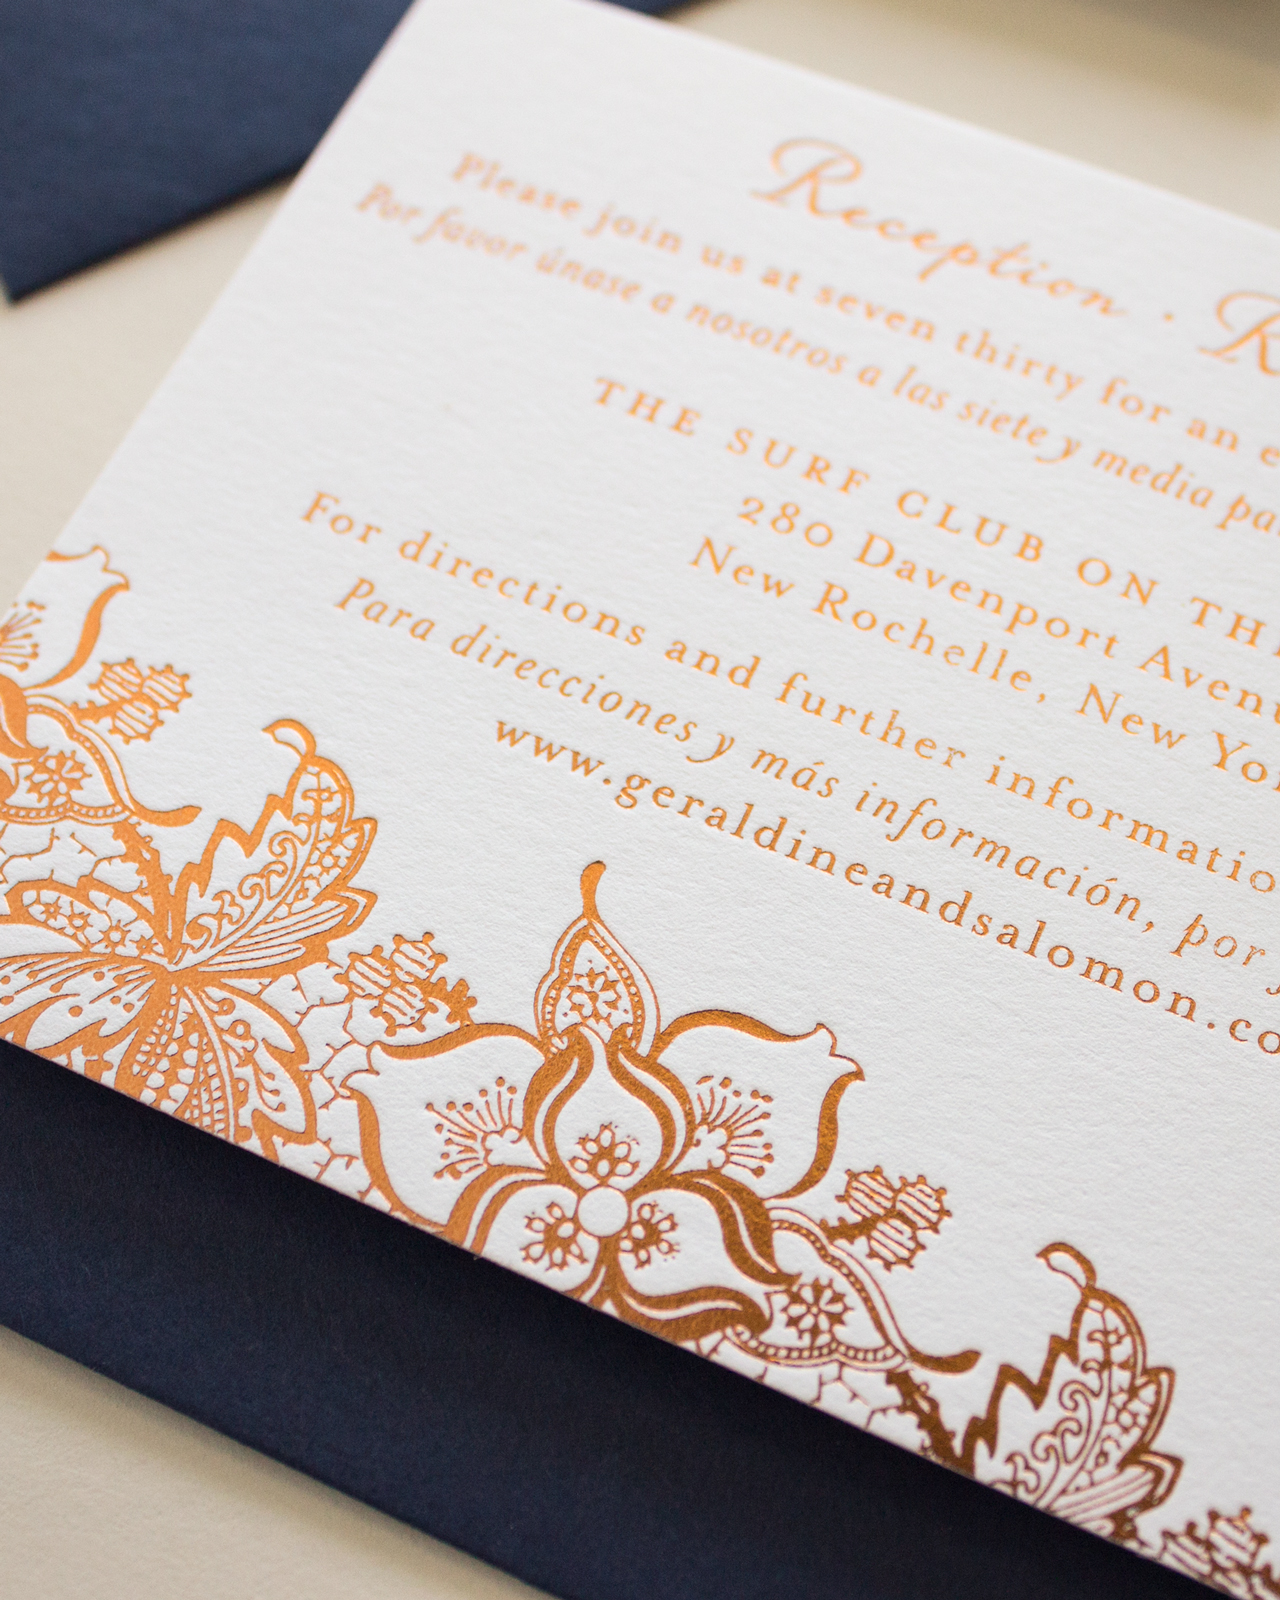 Bilingual Copper Foil and Blind Letterpress Wedding Invitations by Banter and Charm